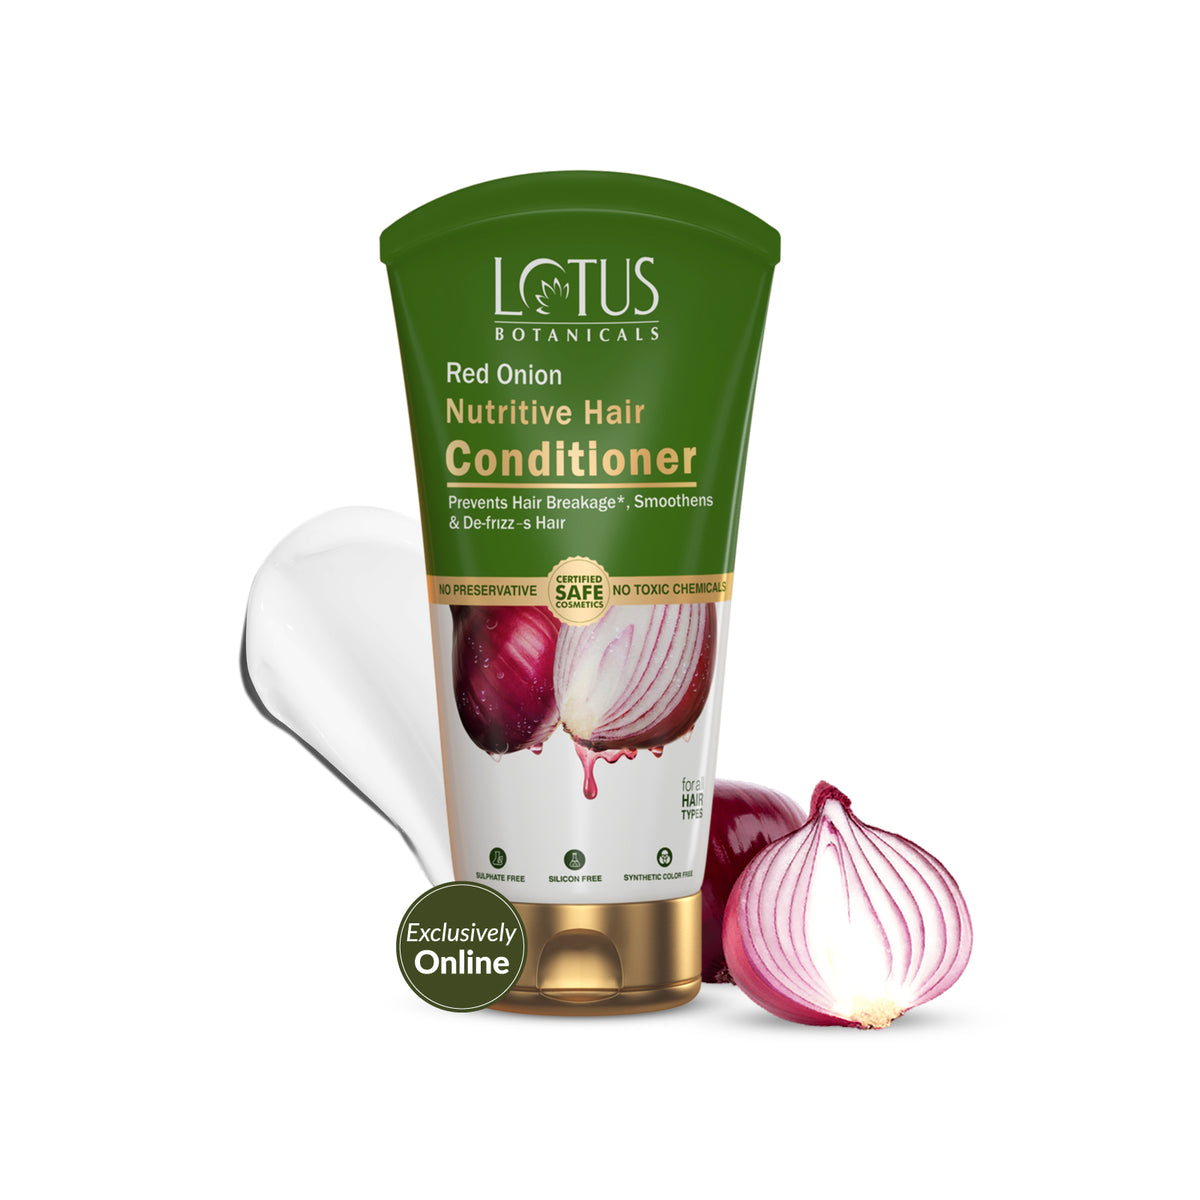 Red Onion Nutritive Hair Conditioner